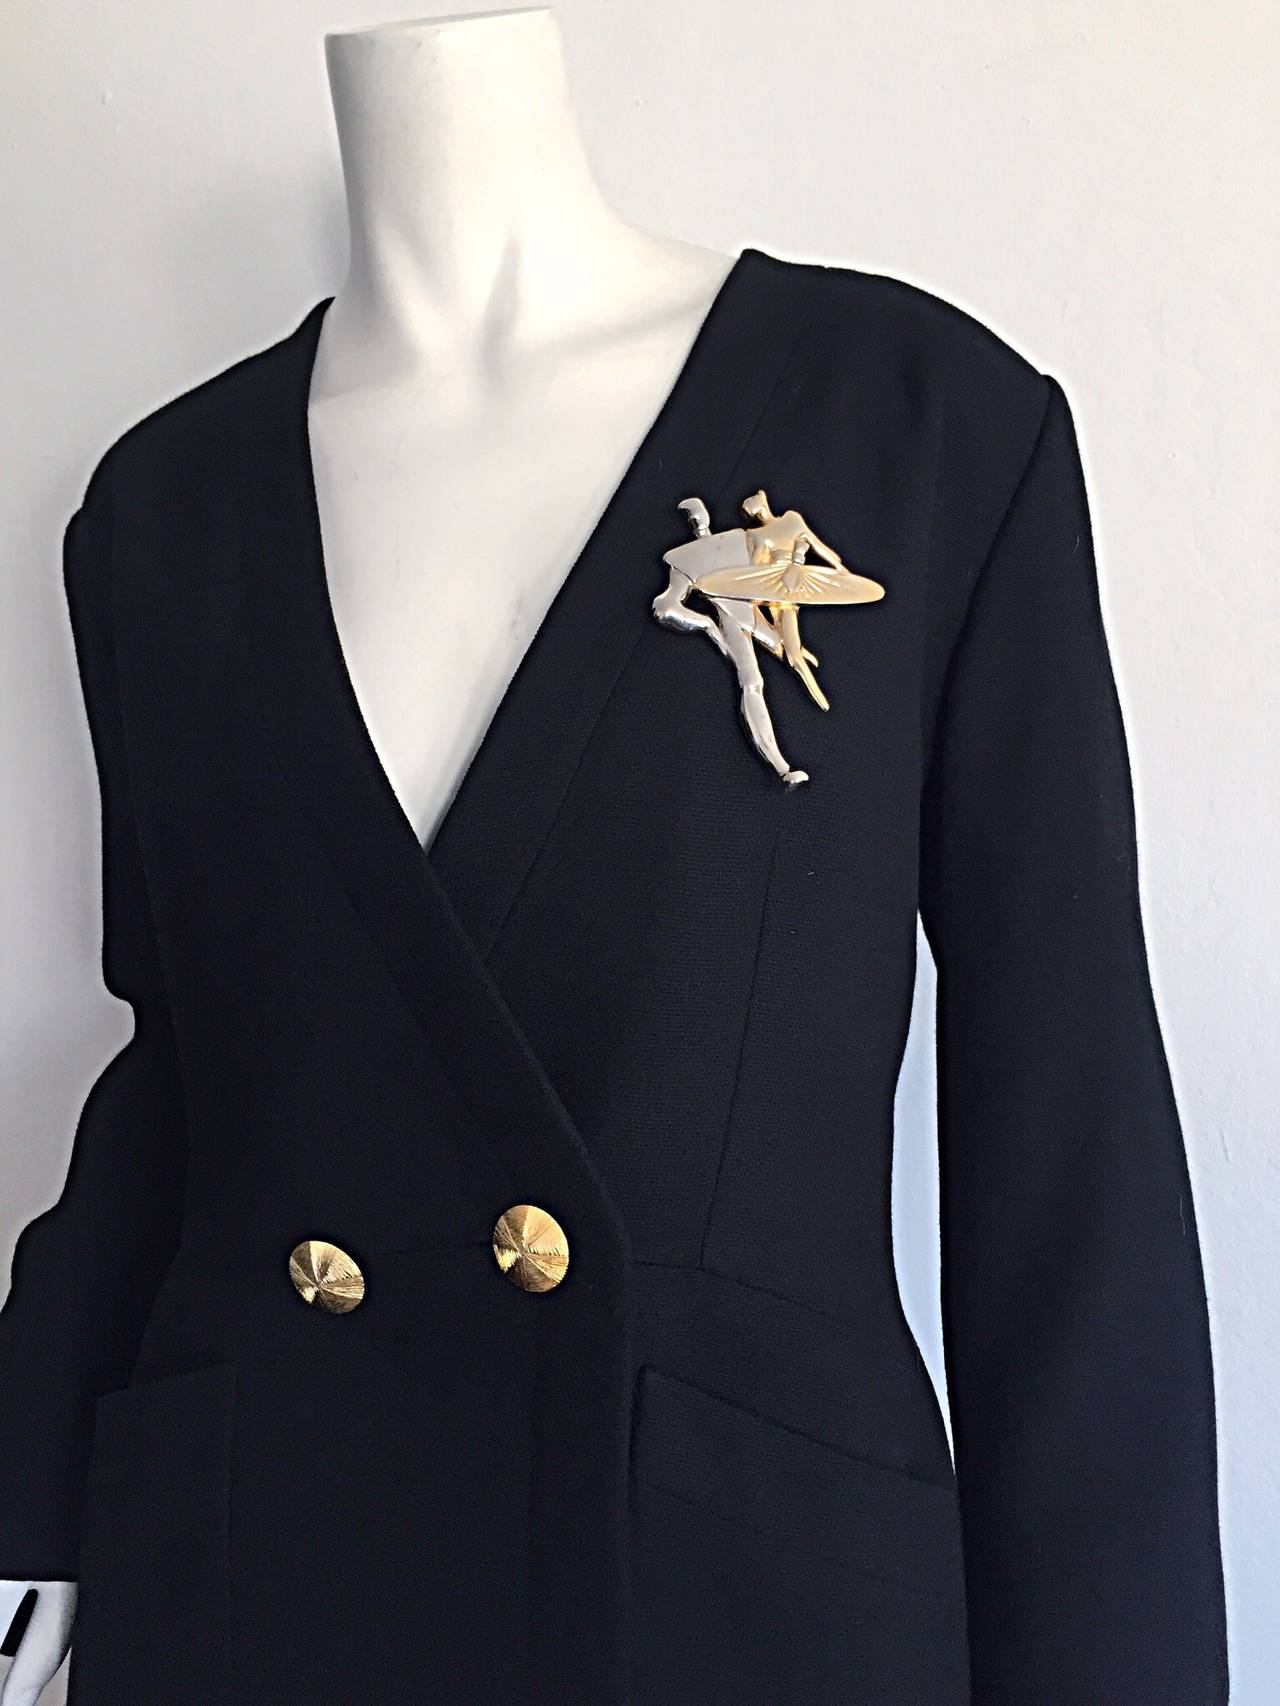 Vintage Yves Saint Laurent ' Rive Gauche ' Black Skirt Suit Size 44 YSL In Excellent Condition For Sale In San Diego, CA